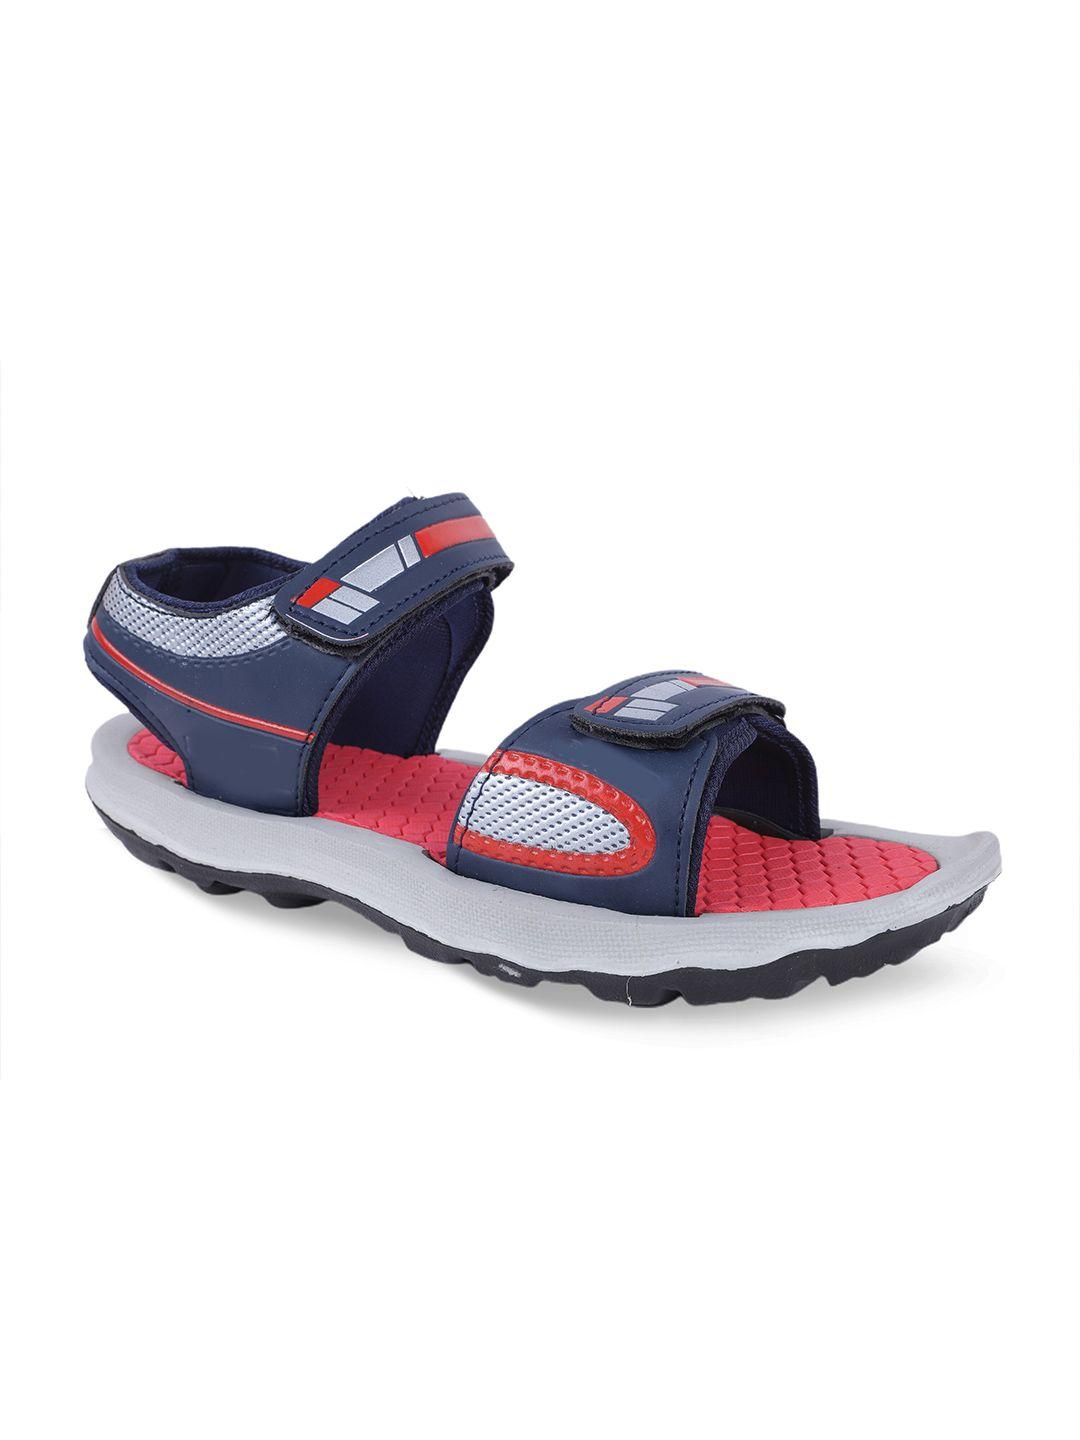 fabbmate men red & navy blue sports sandals